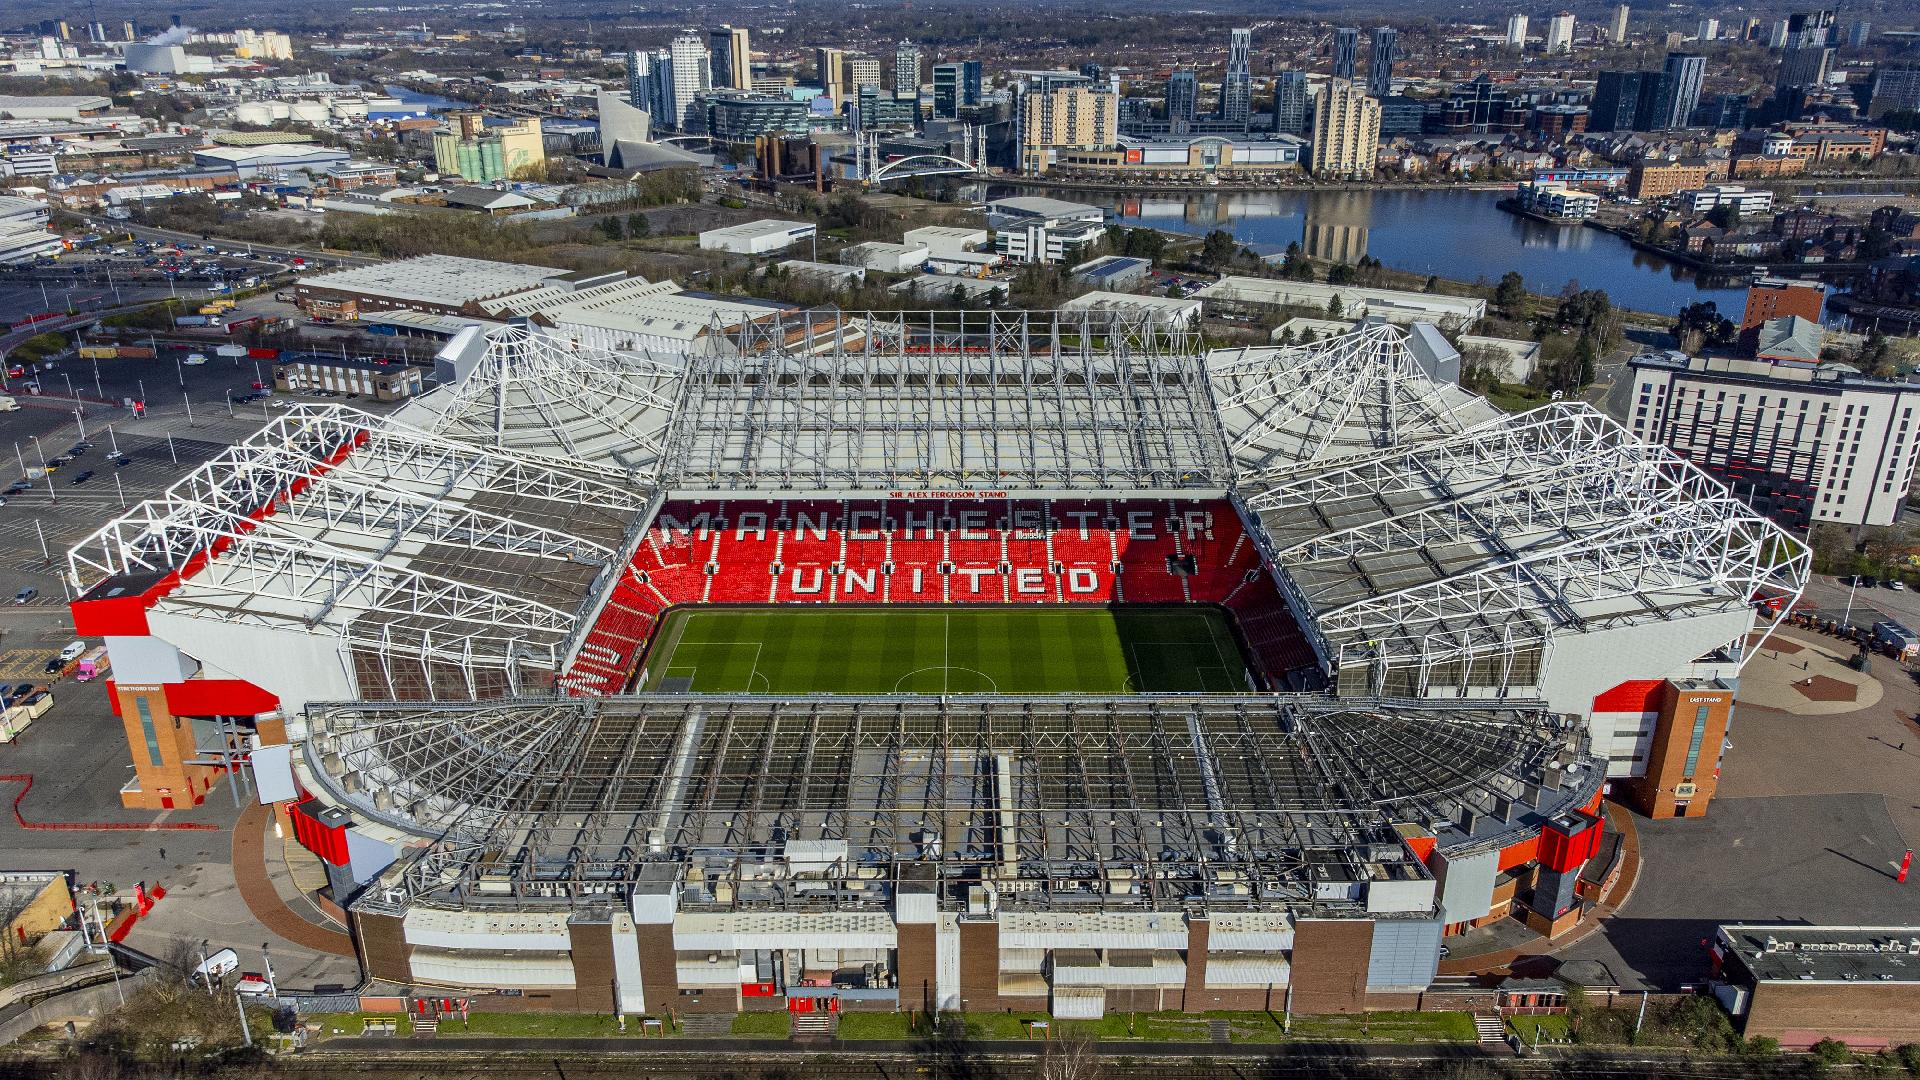 Two Man Utd fans arrested following tragedy chanting at Liverpool FA Cup tie